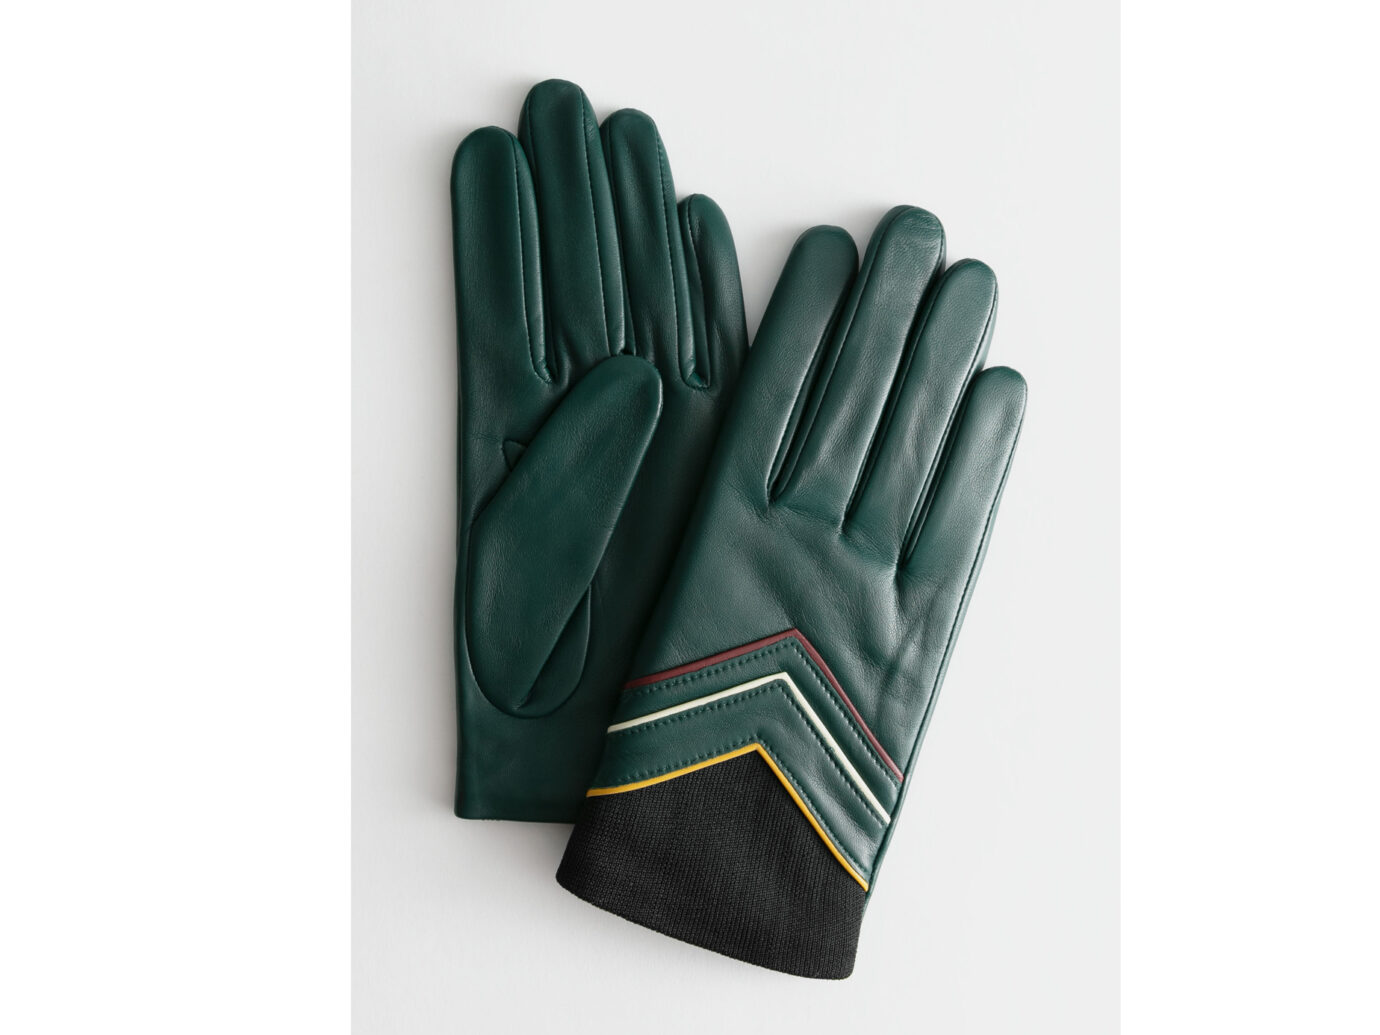 & Other Stories Arrow Piping Leather Gloves